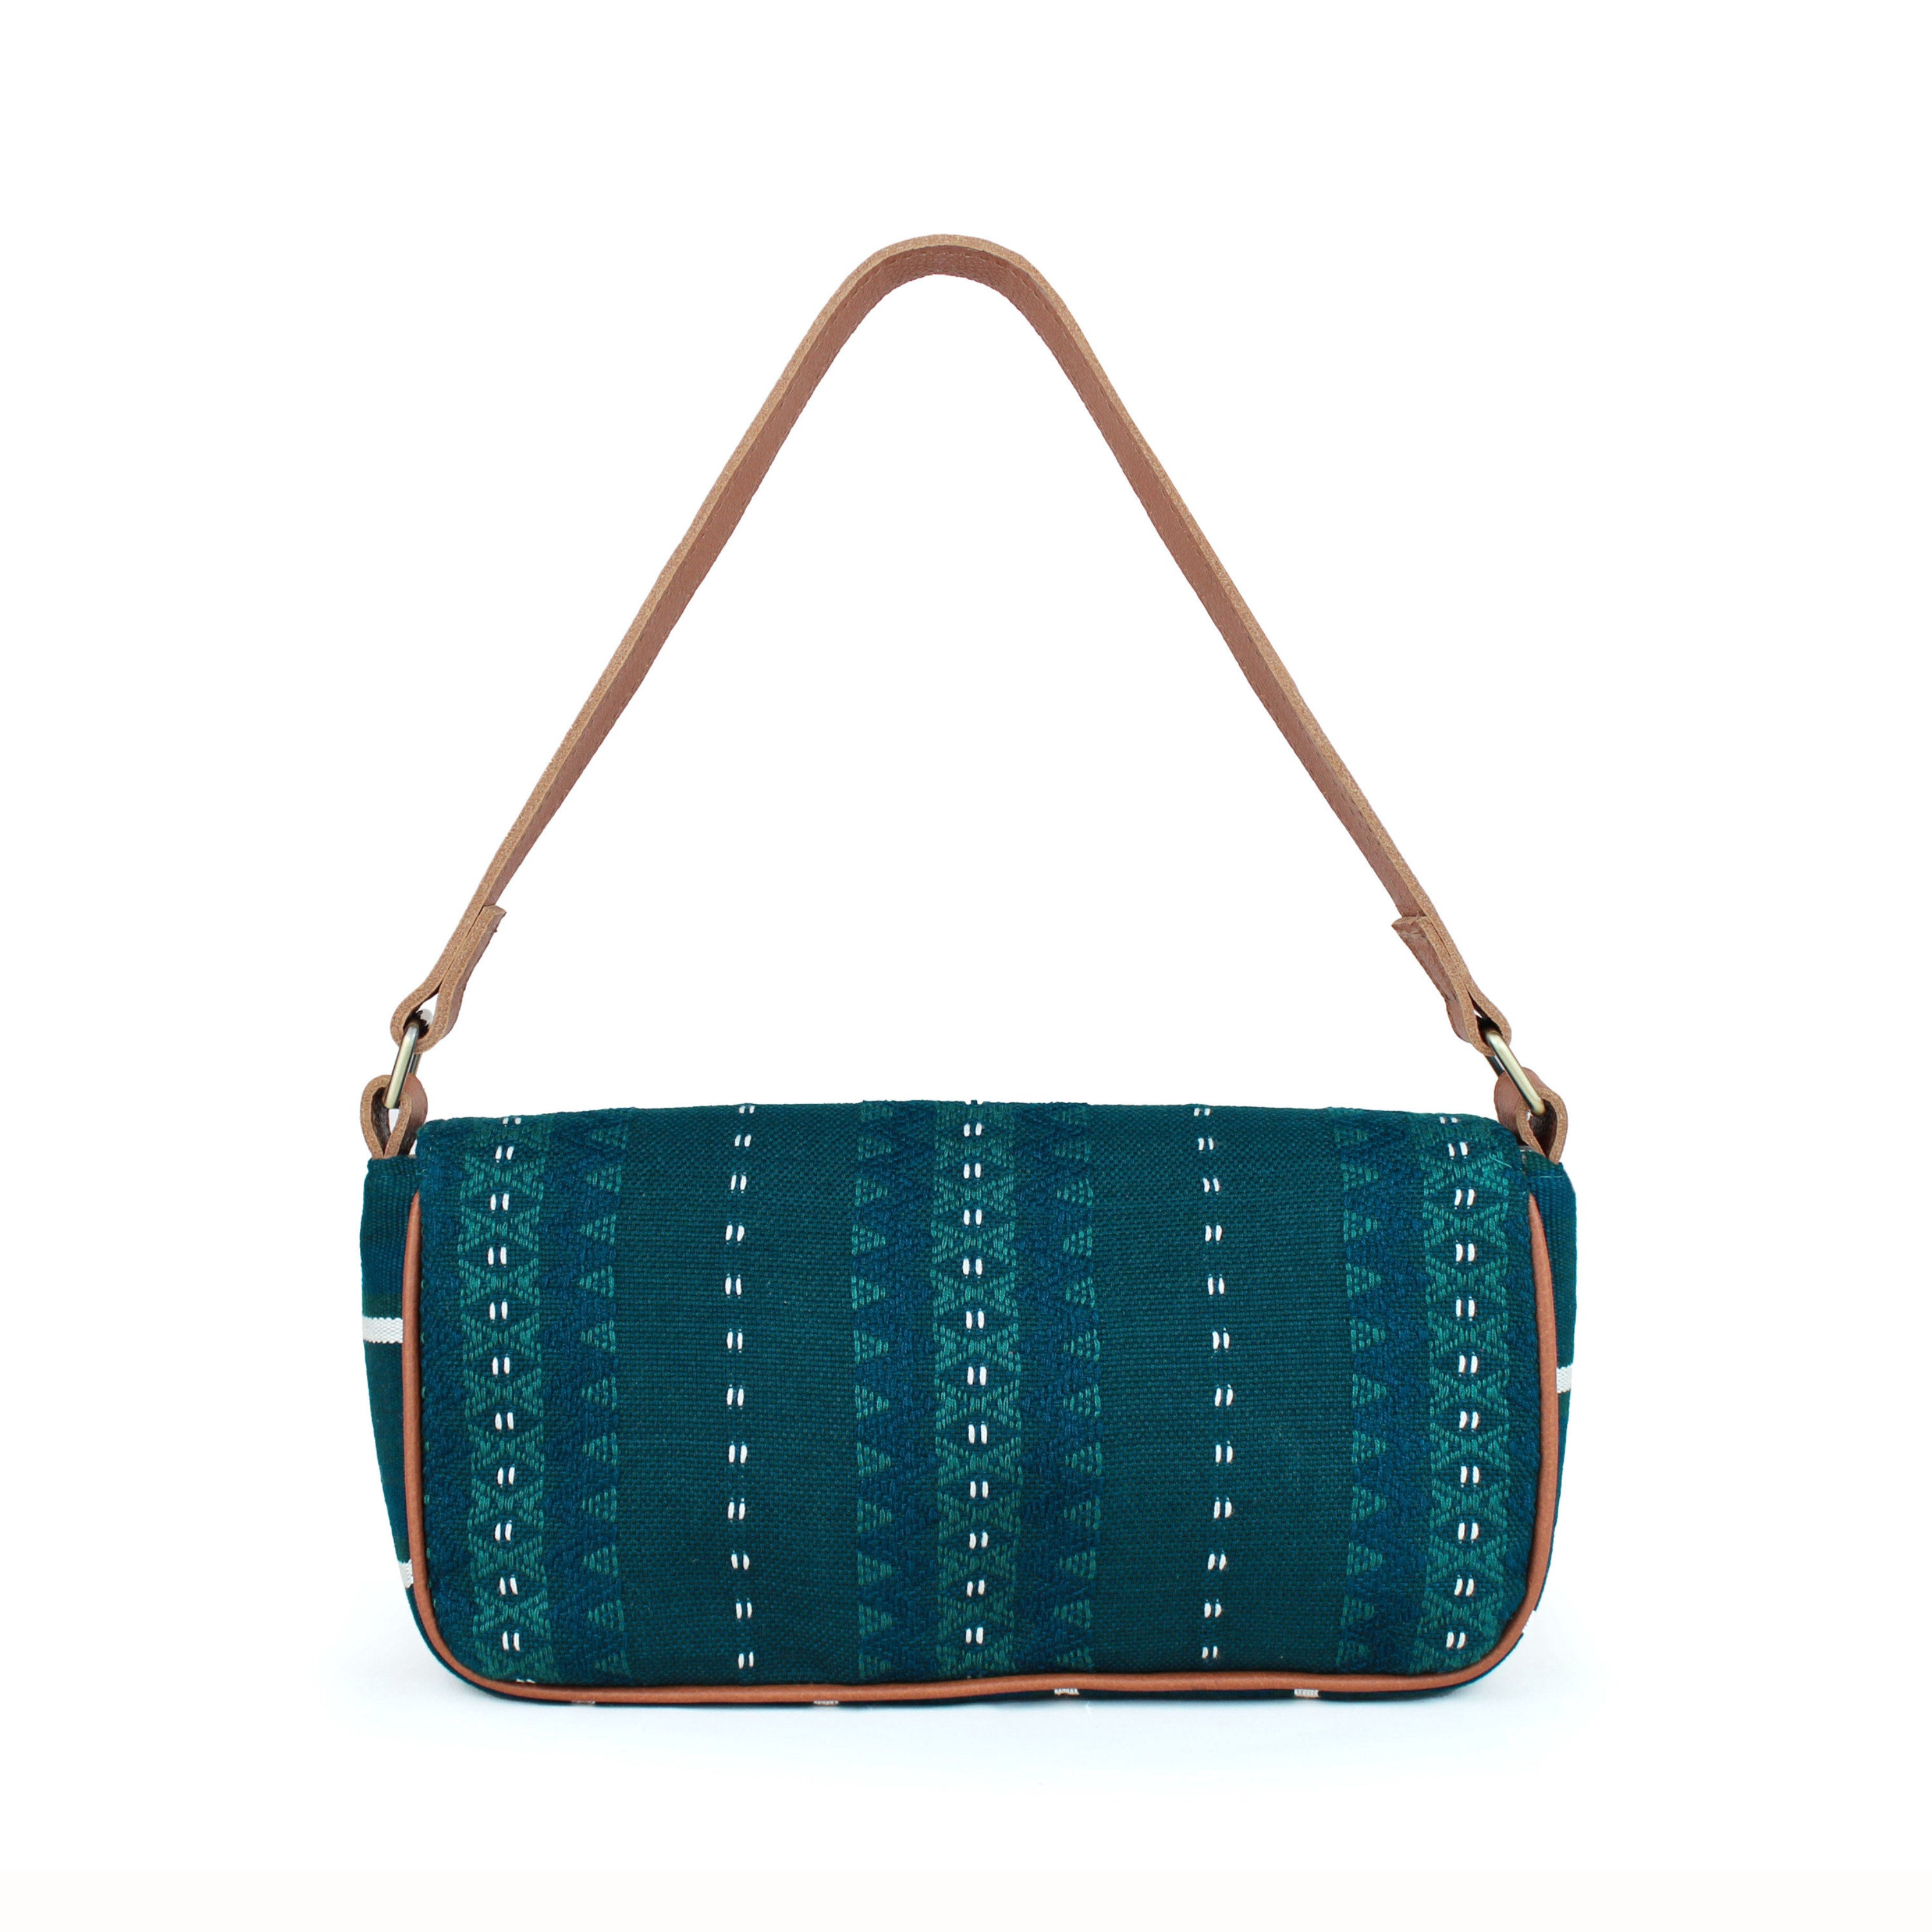 Back view of the Olivia Artisan Handwoven Deep Forest Shoulder Bag. It has a deep turquoise and white geometric pattern. It has a leather strap and leather piping. The bag has a short and long width shape.